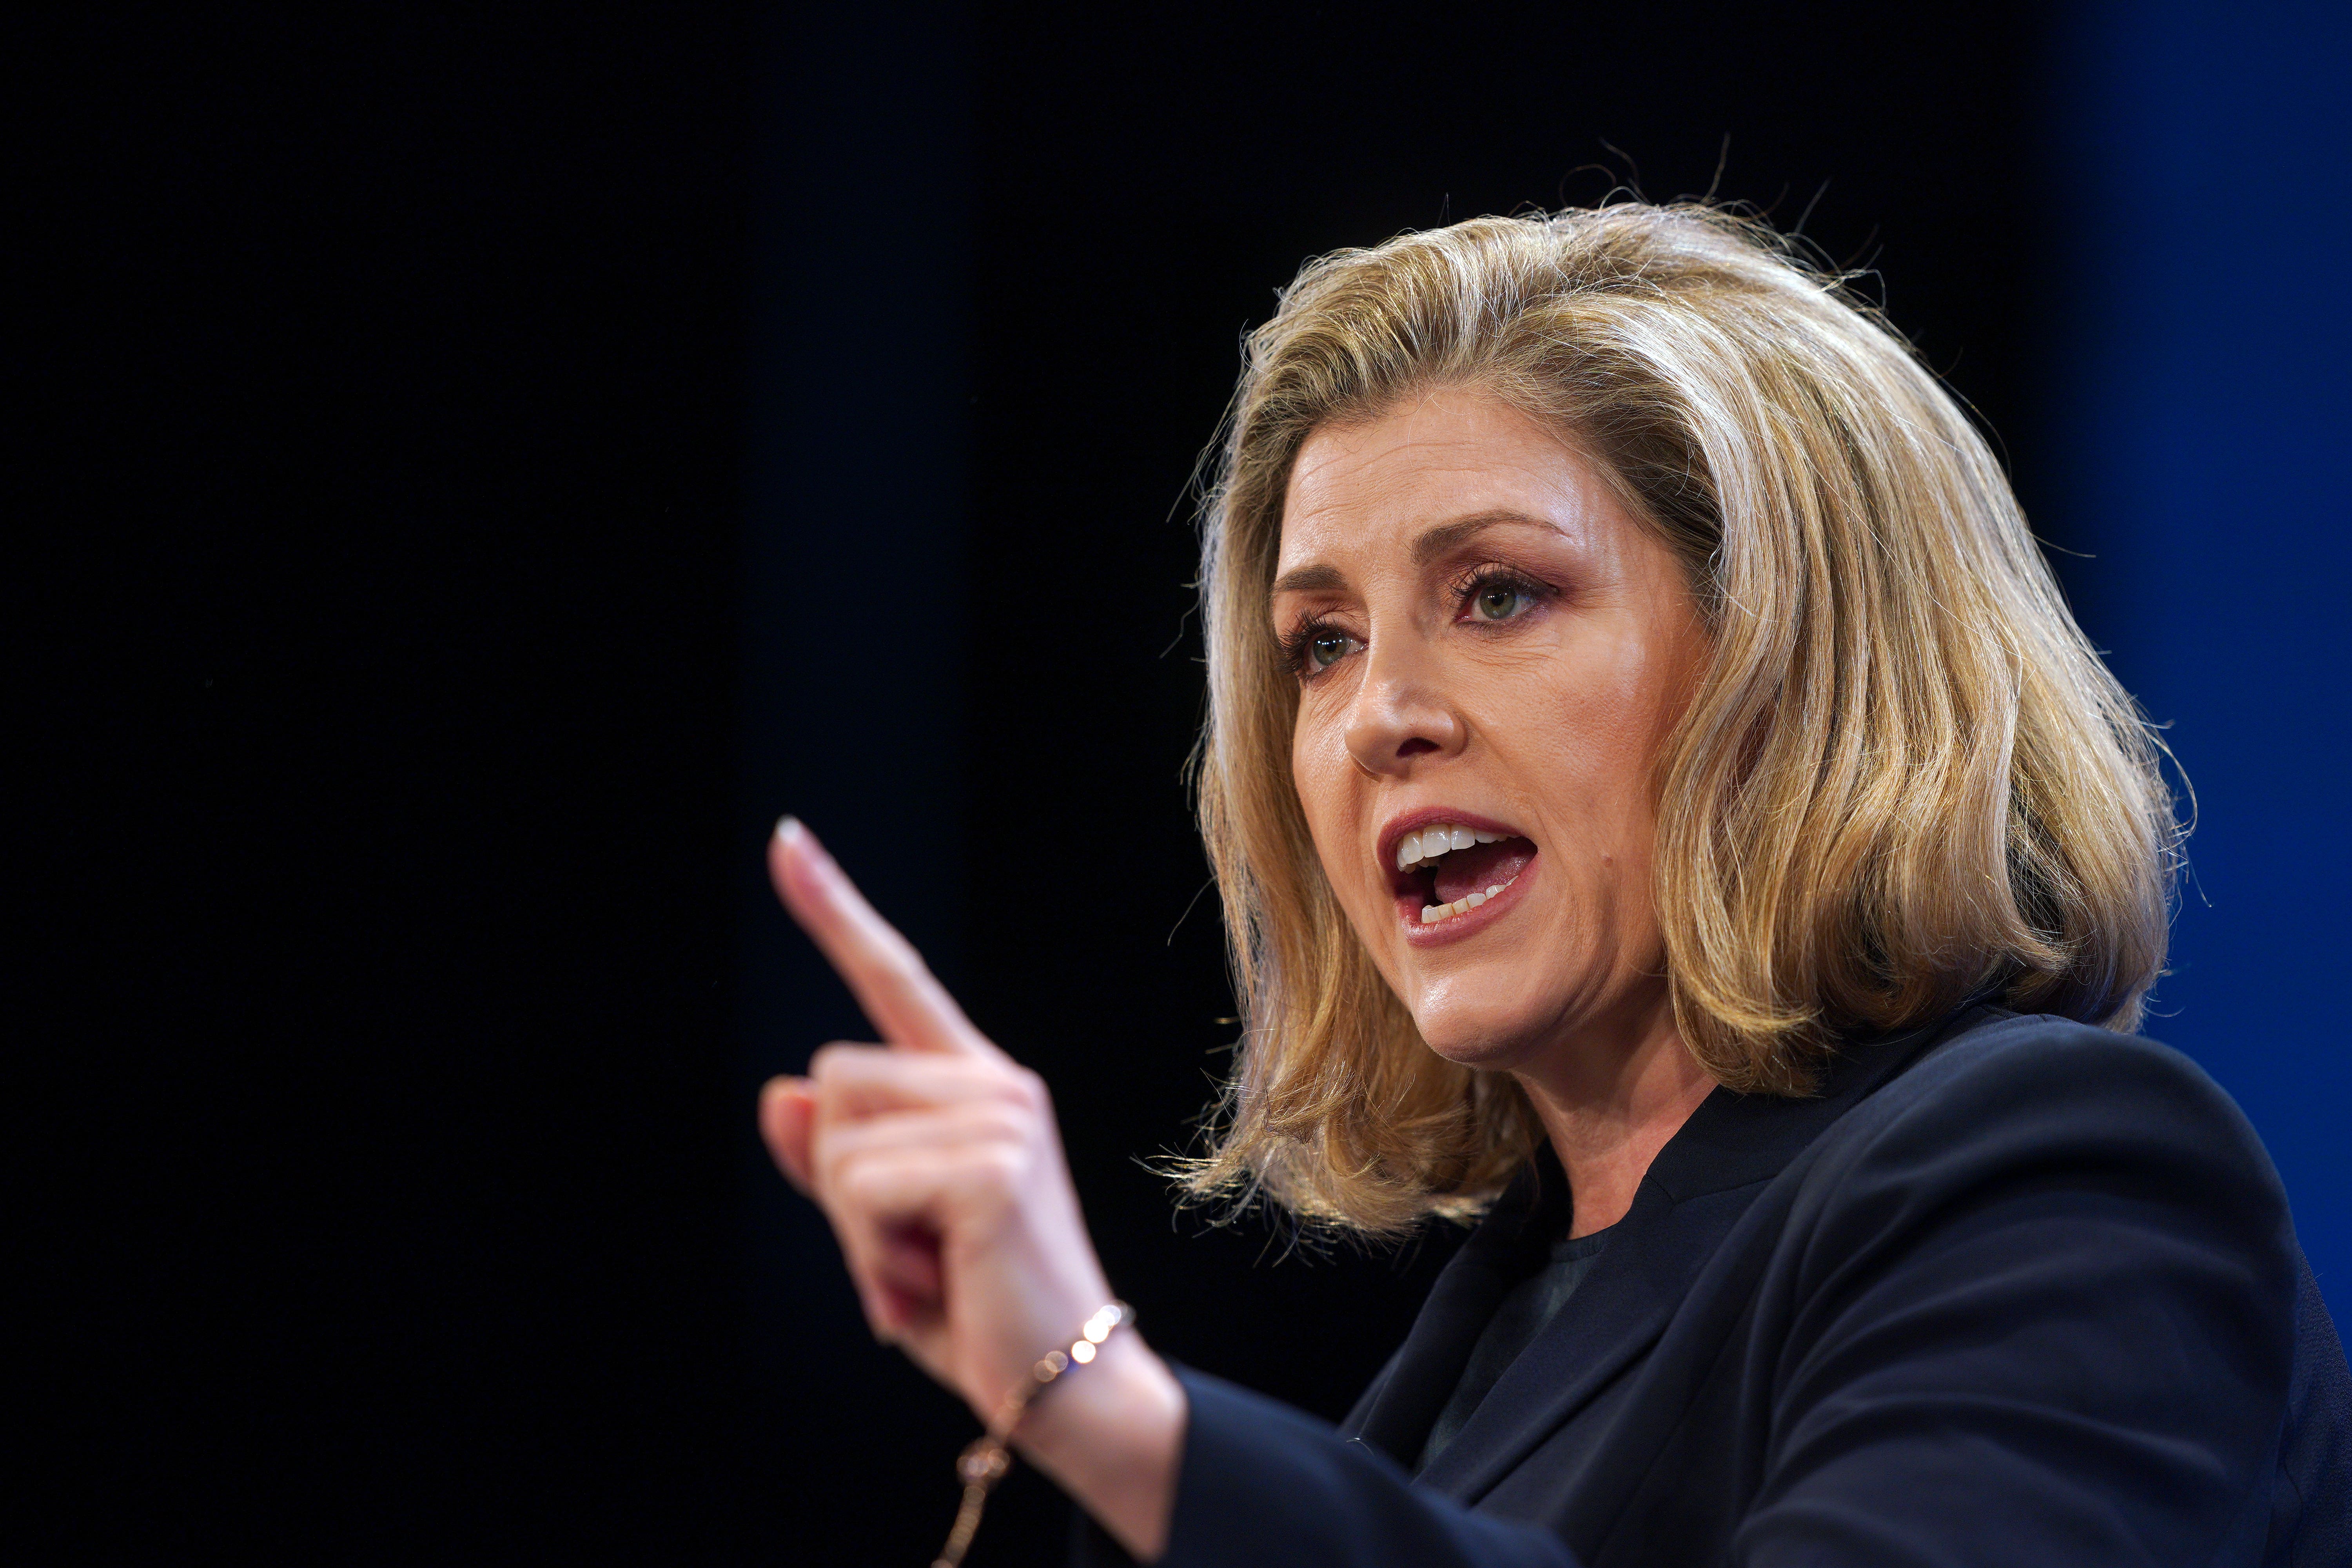 Penny Mordaunt took aim at the PM over his controversial trans joke